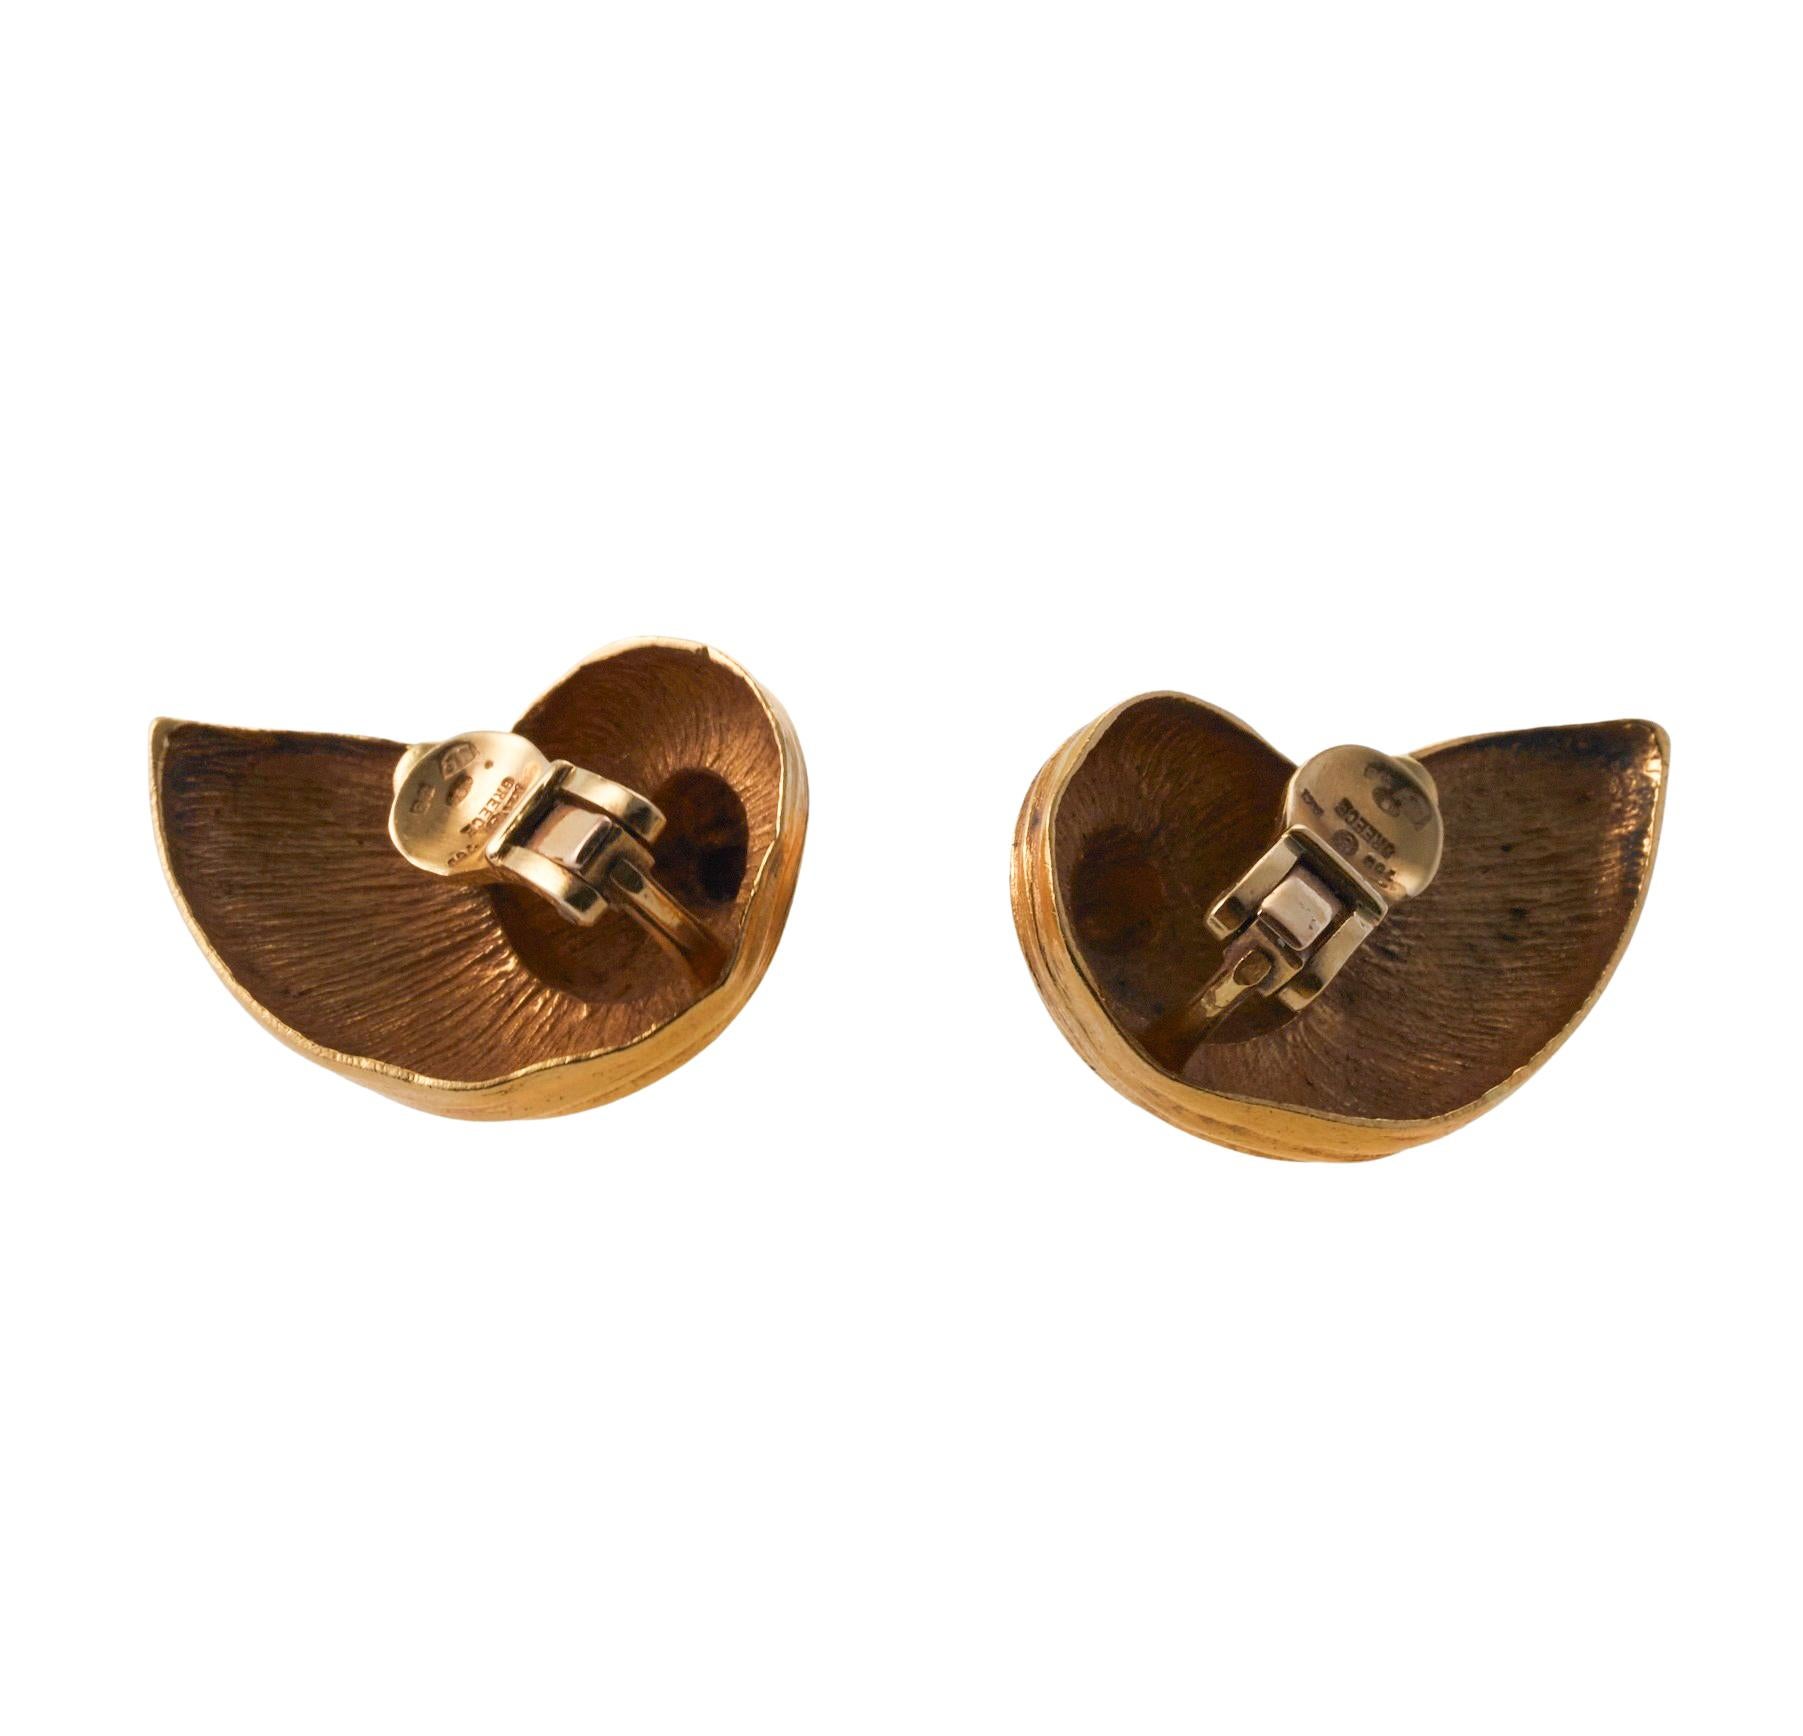 Lalaounis Greece Gold Shell Motif Earrings In Excellent Condition For Sale In Lambertville, NJ